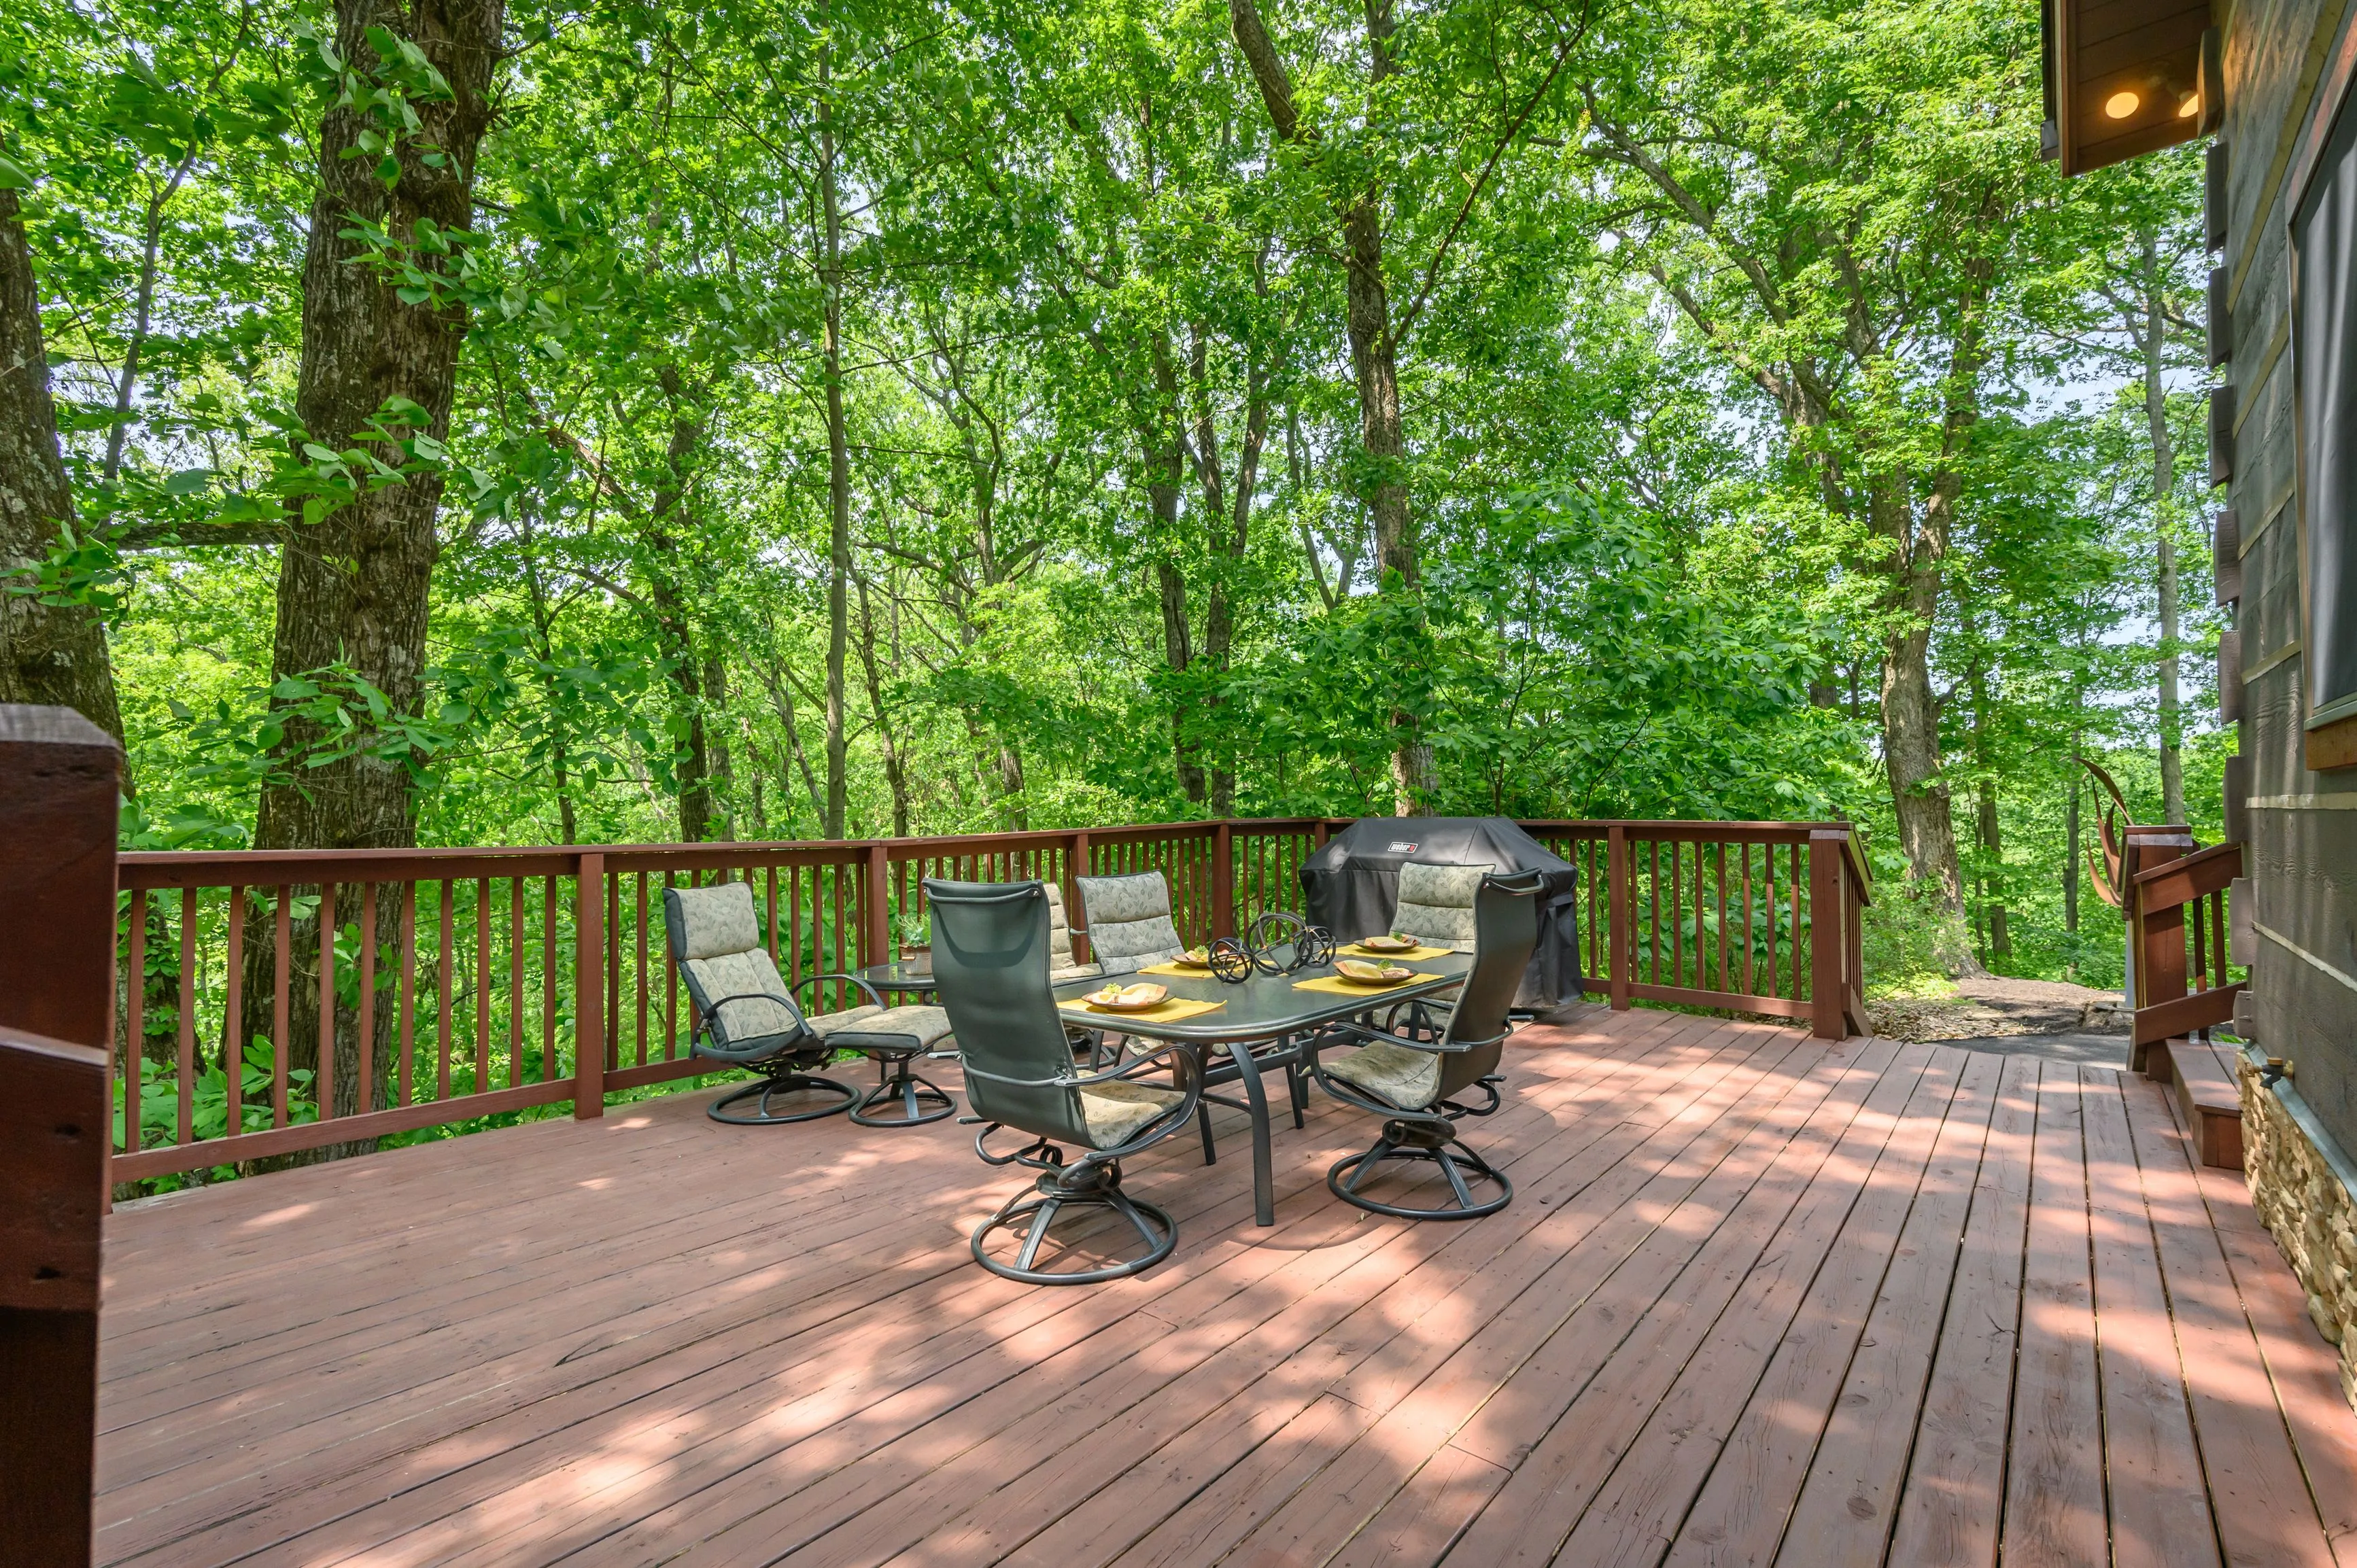 Wooden deck with outdoor furniture surrounded by lush green trees.